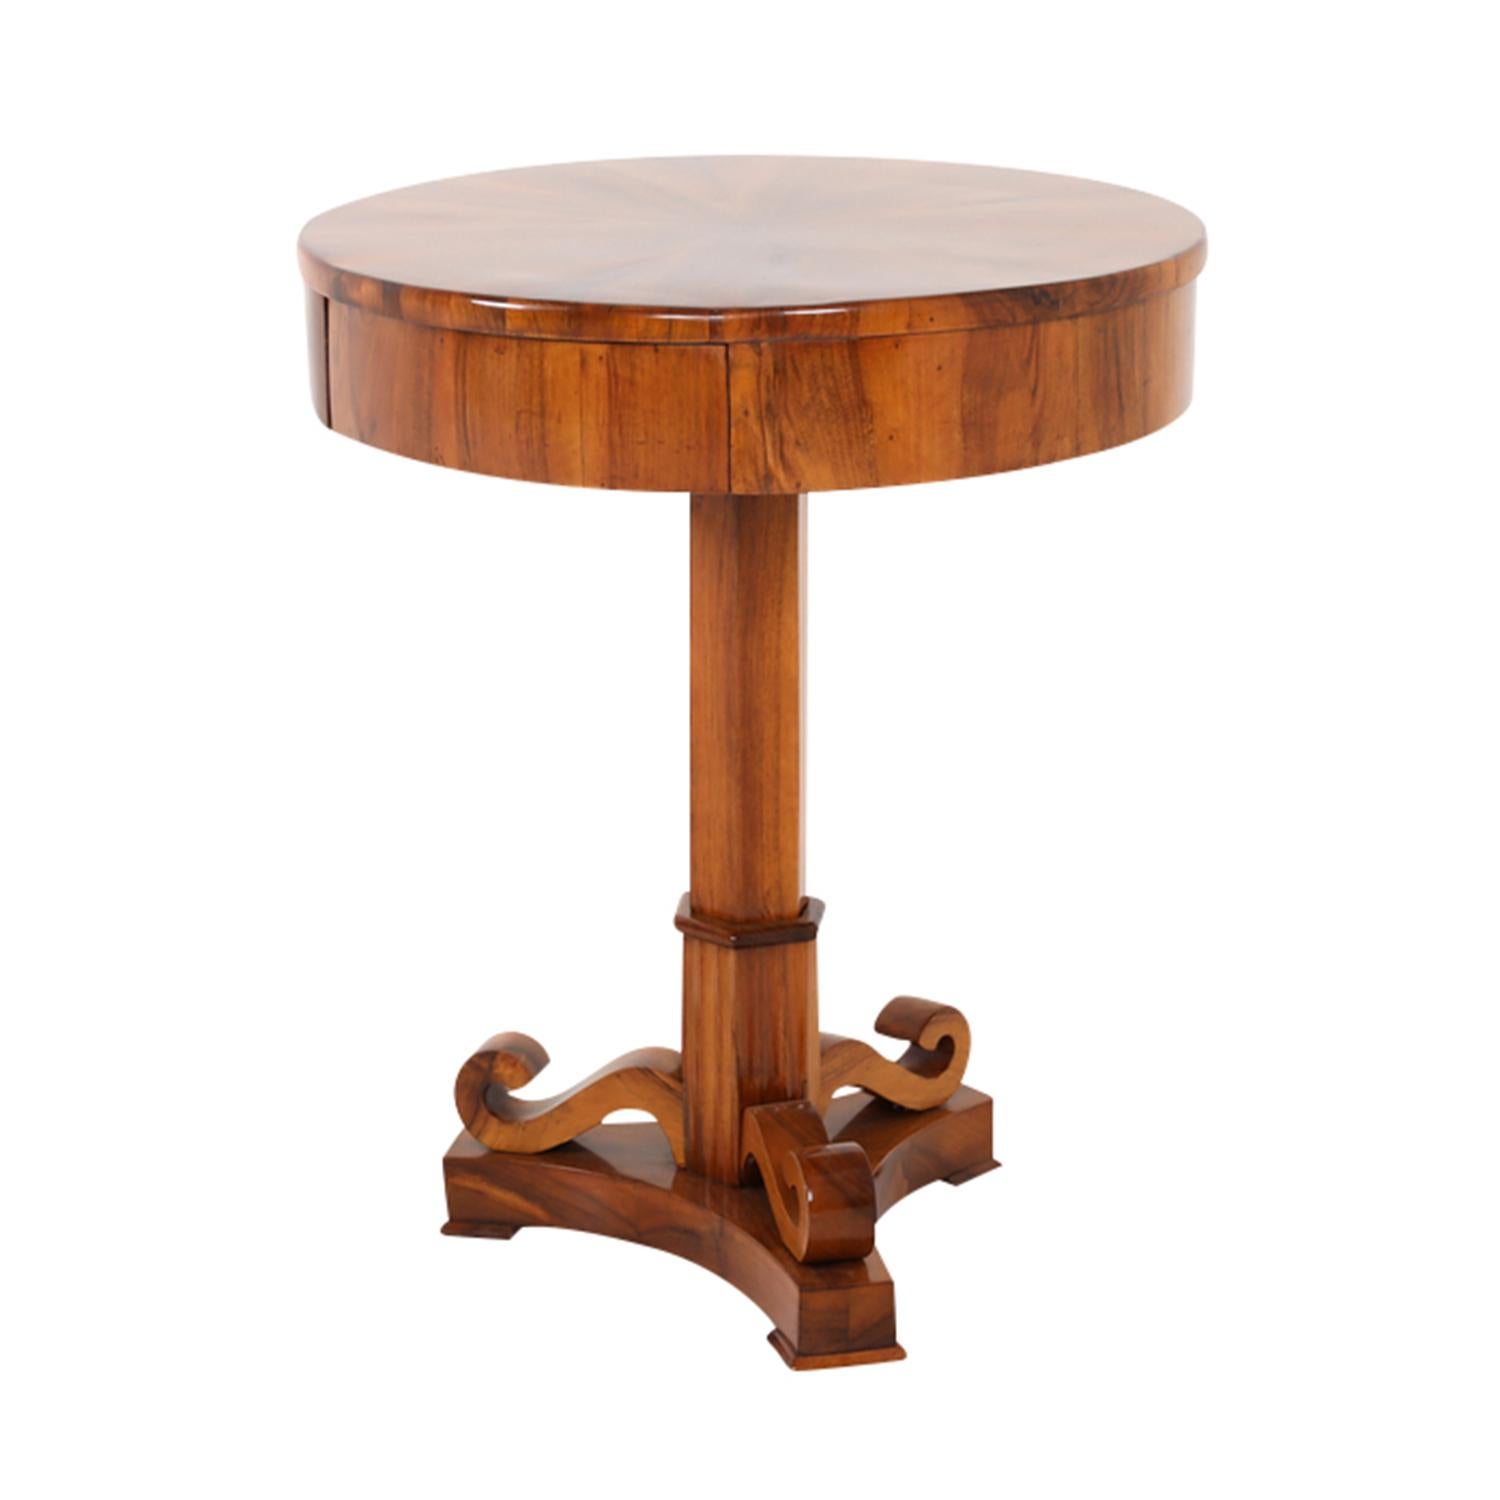 A light-brown, antique German Biedermeier side table made of hand crafted shellac polished, partly veneered Walnut, in very good condition. The small round detailed occasional table is composed with one hidden, pull-out drawer. The end table is